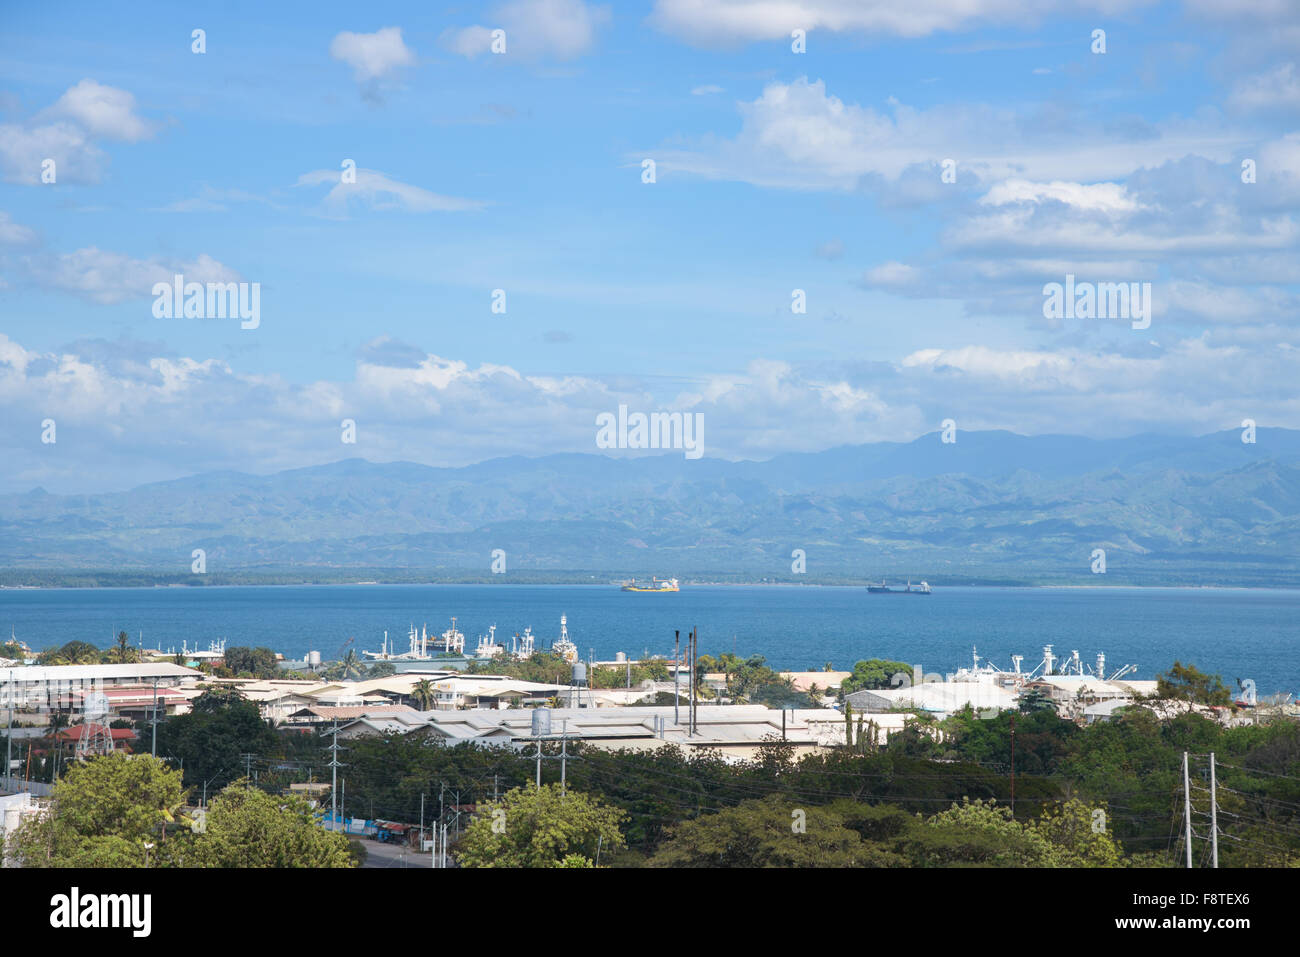 Land side view of the tua harbour and tuna processing plant in General Santos City, South Cotabato Province in The Philippines. Stock Photo